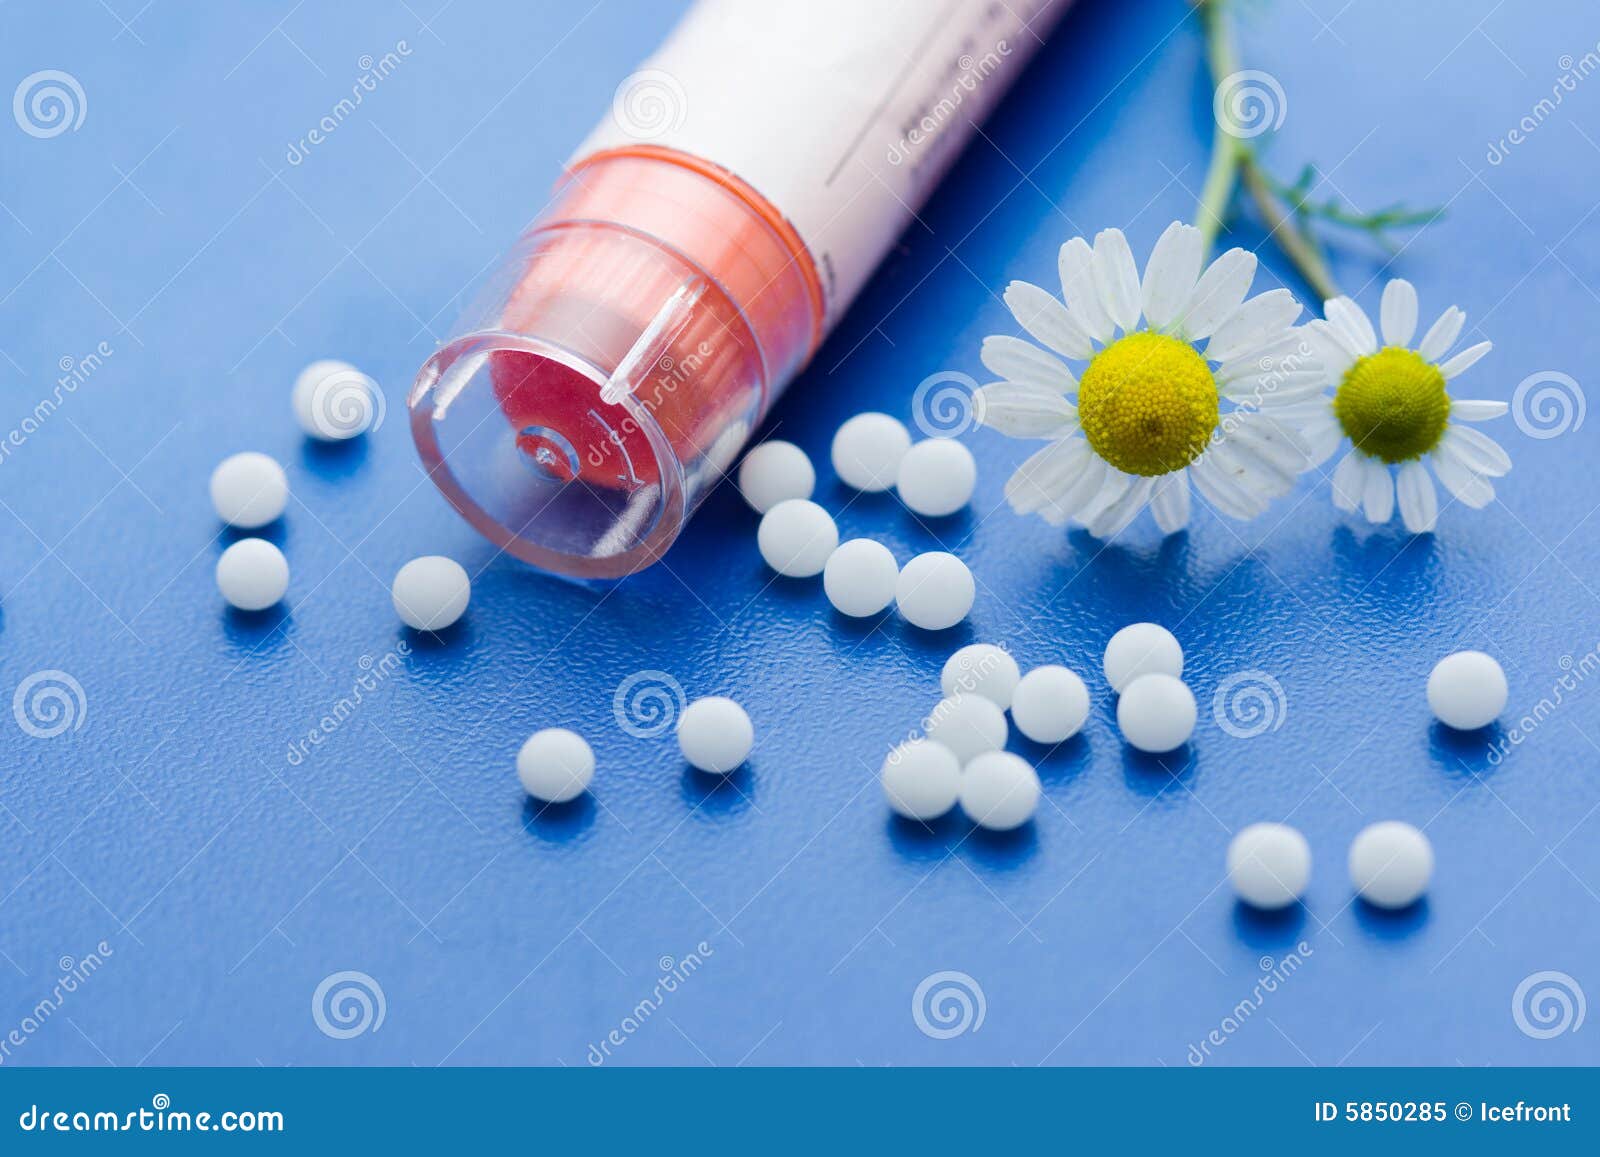 homeopathic medication